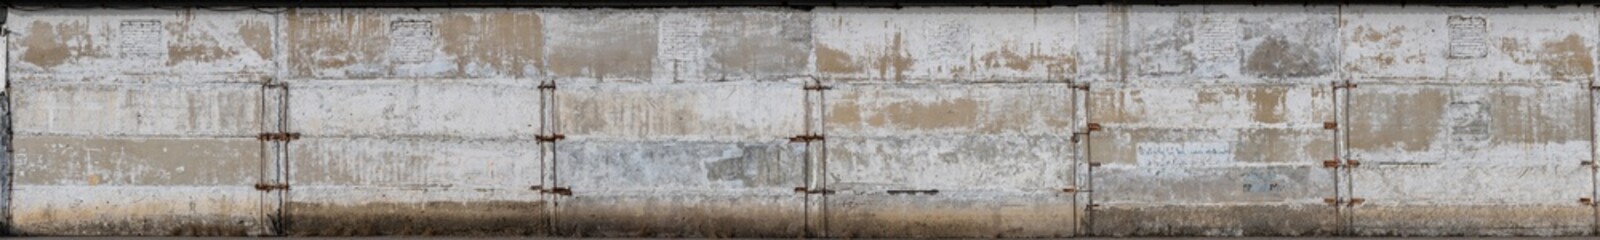 The aged wall of an industrial building